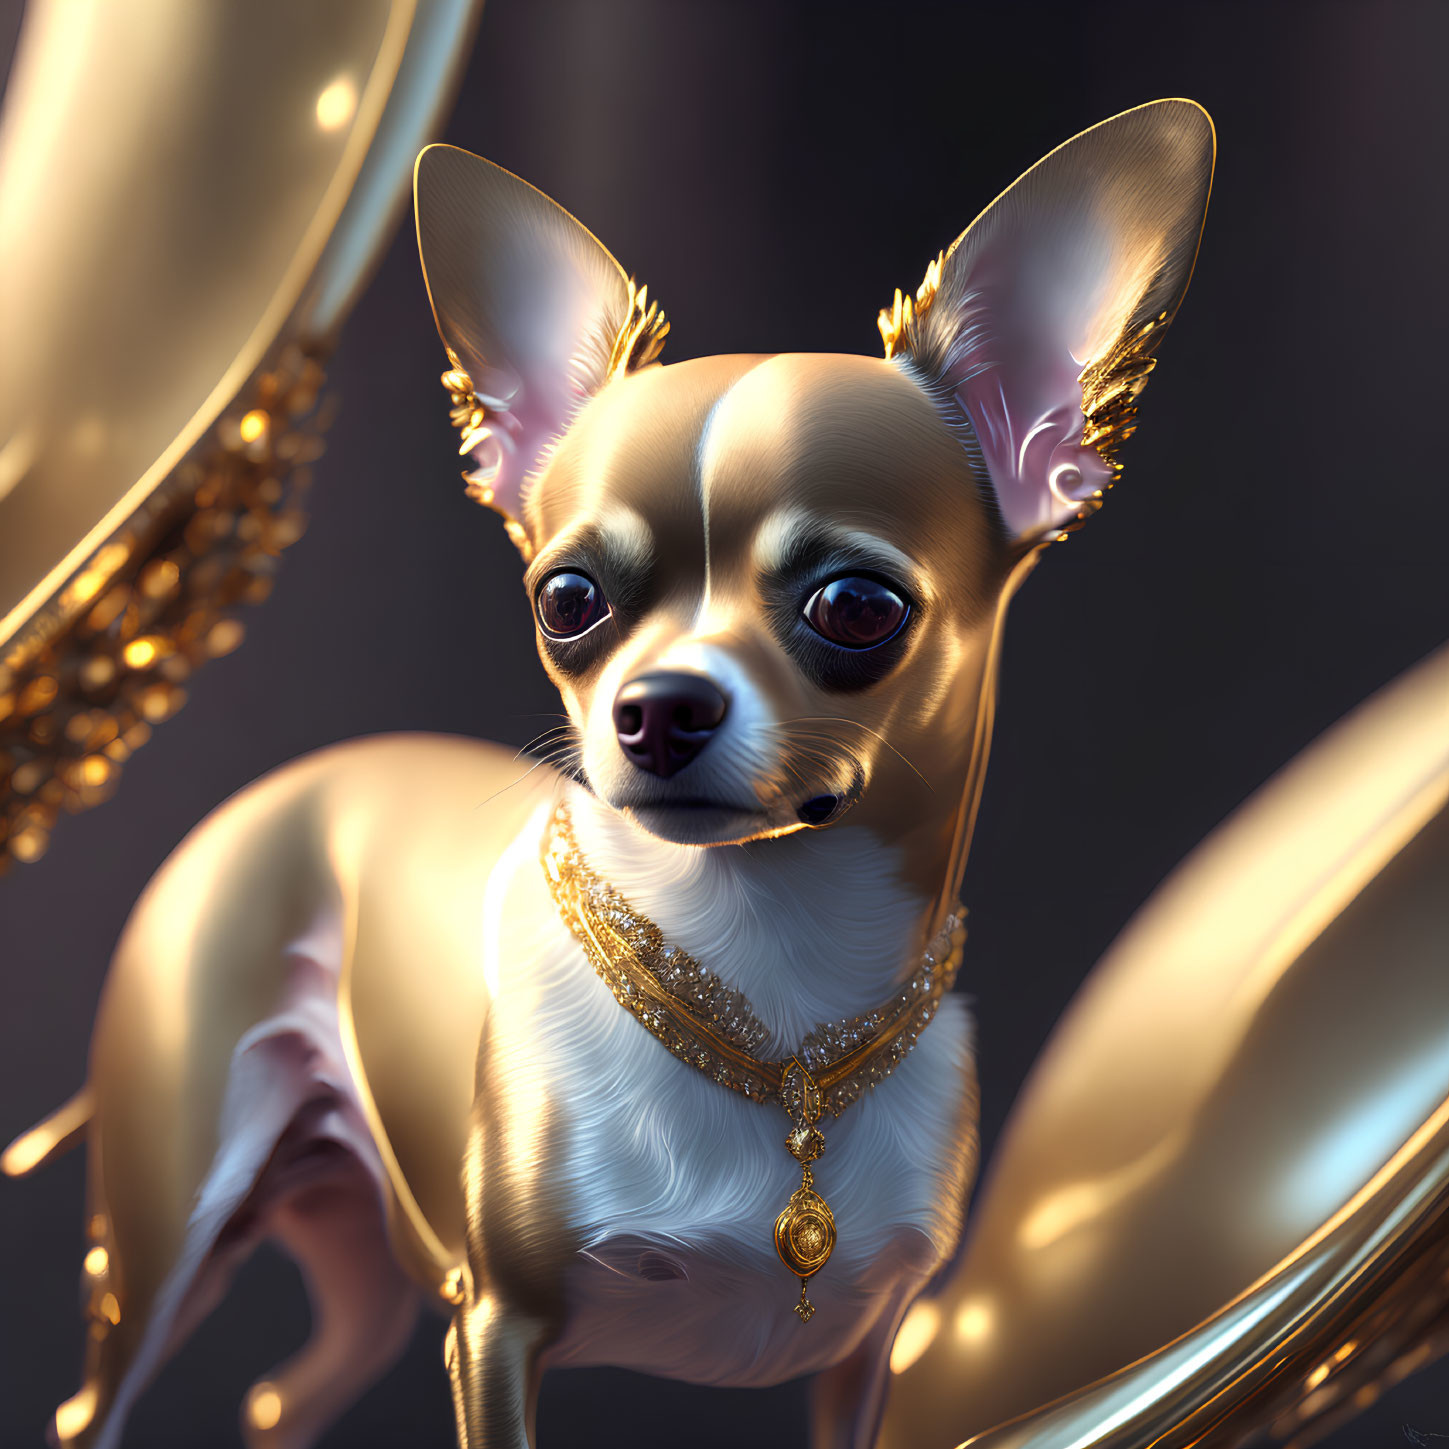 Glossy Fur Chihuahua with Golden Accessories on Blurred Background